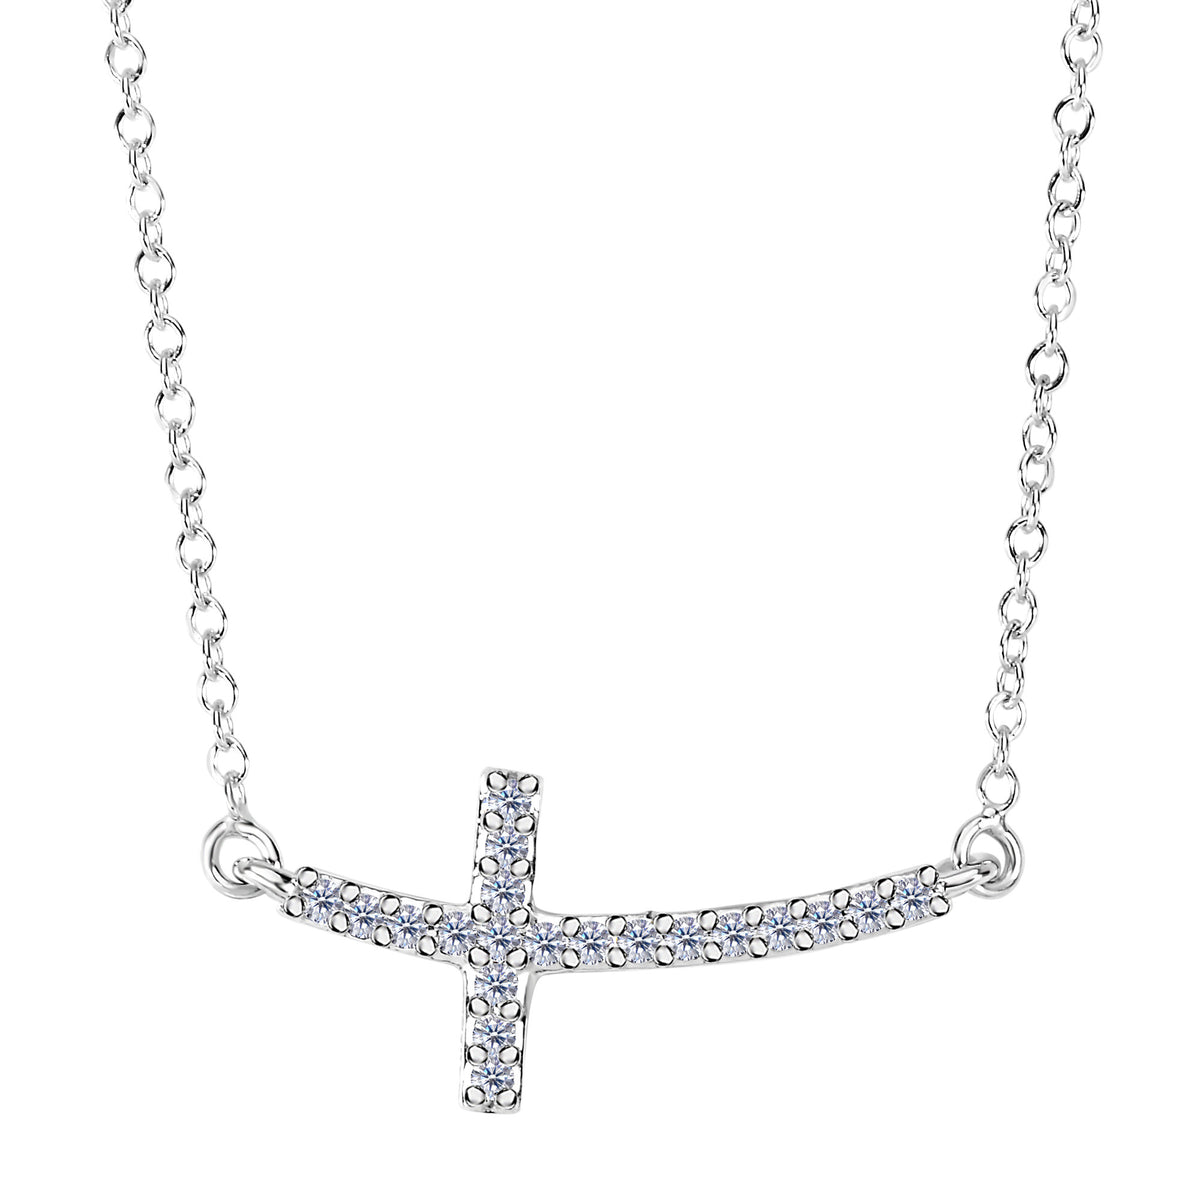 14k White Gold With 0.12ct Diamonds Curved Side Ways Cross Necklace - 18 Inches - JewelryAffairs
 - 1